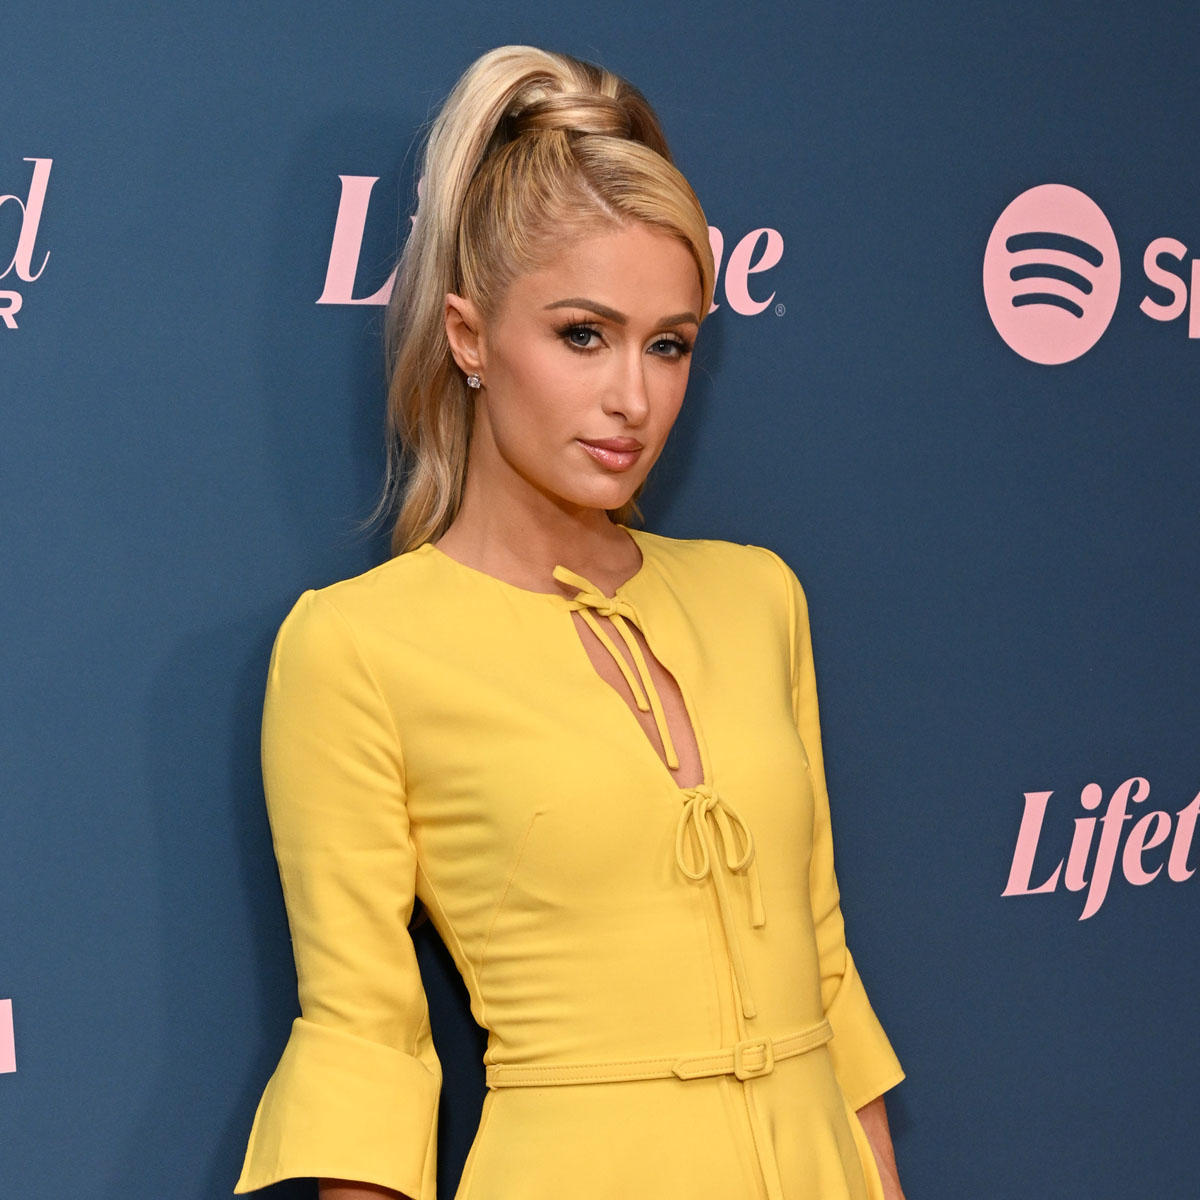 Paris Hilton Gives Update on Her and Carter Reum’s Future Family Plans